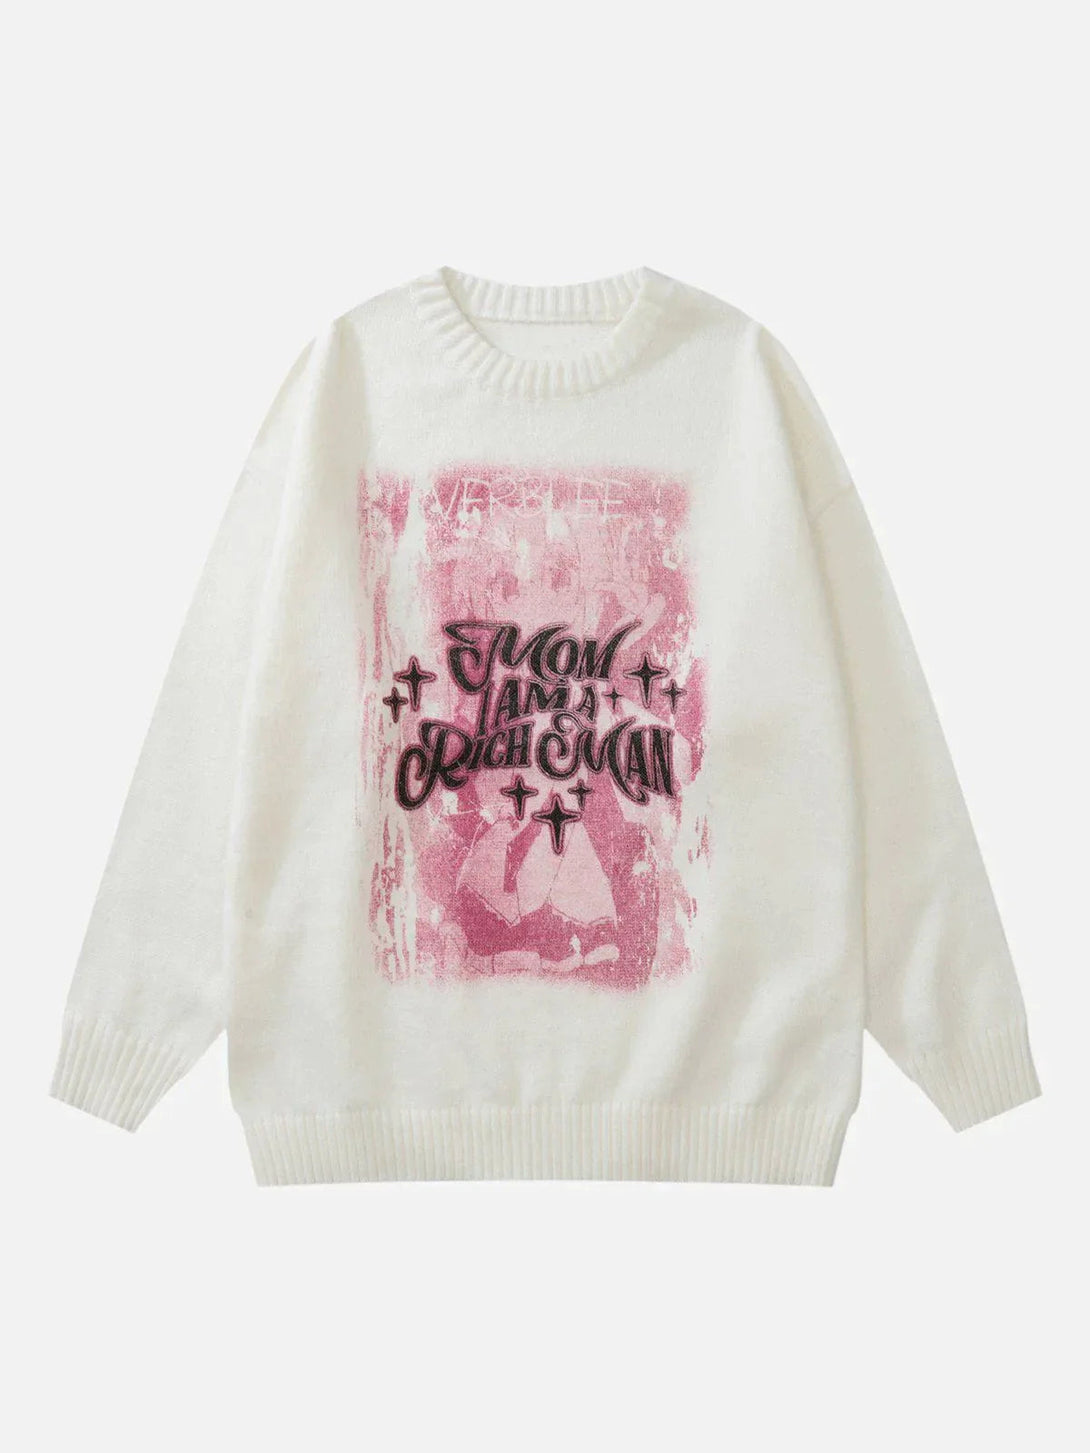 Majesda® - Vintage Letters Print Sweater outfit ideas streetwear fashion